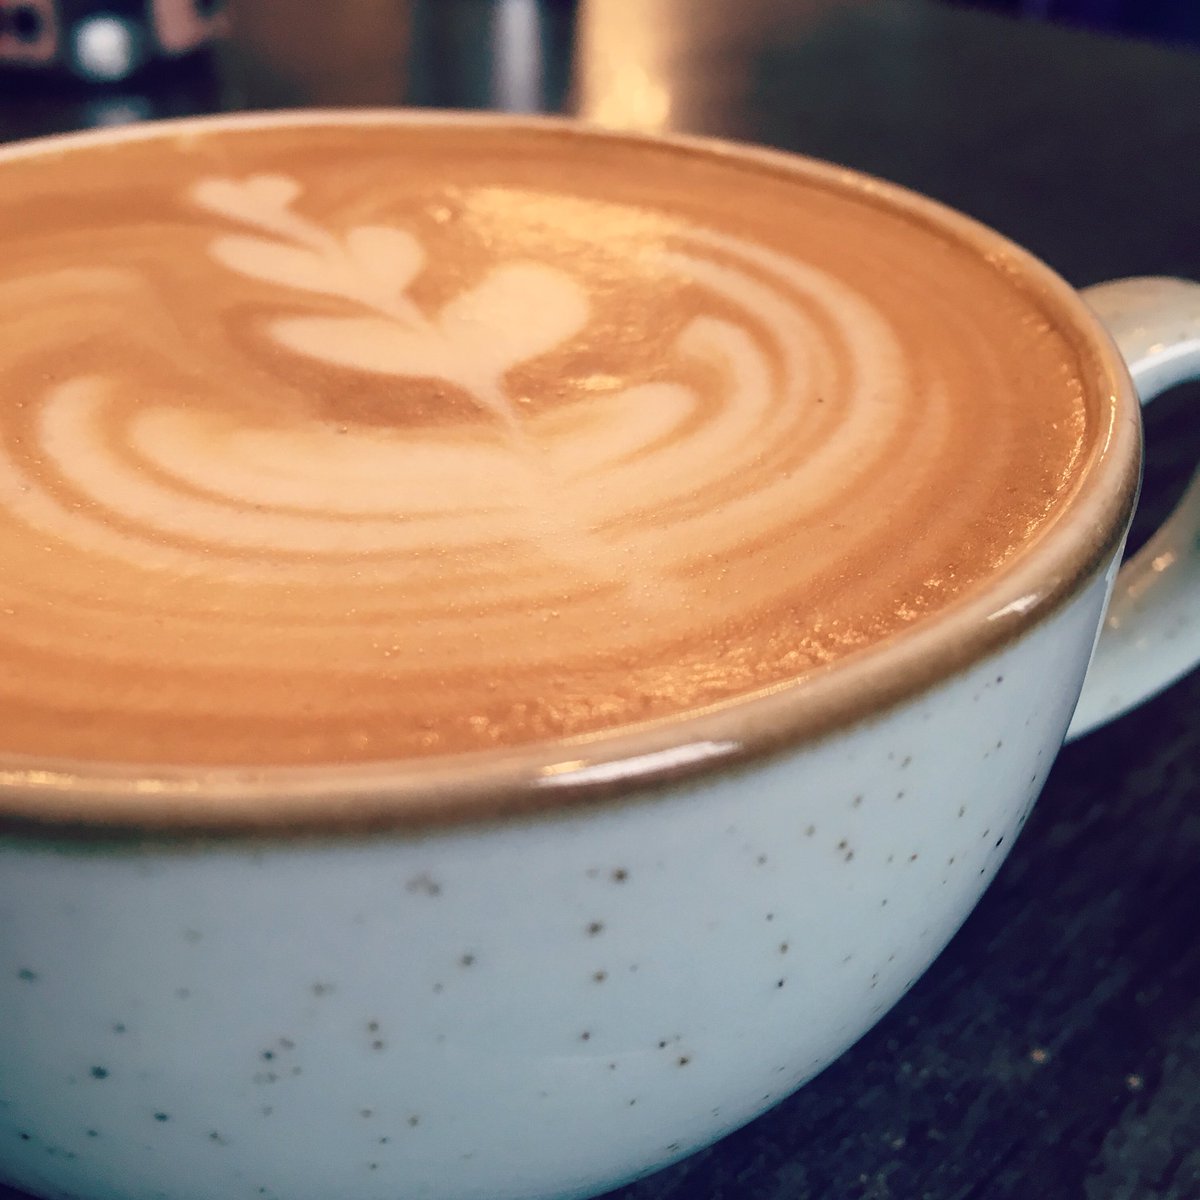 Come and have a delicious coffee whilst you wait for the rain to stop! ☔️ #coffeeshop #chestercoffee #chestertweets #discoverchester #chestergram #lovechester #lovechesire #independents #chesterindependents #coffeelife #lattelife #latteart #baristacoffee #espresso #heartland